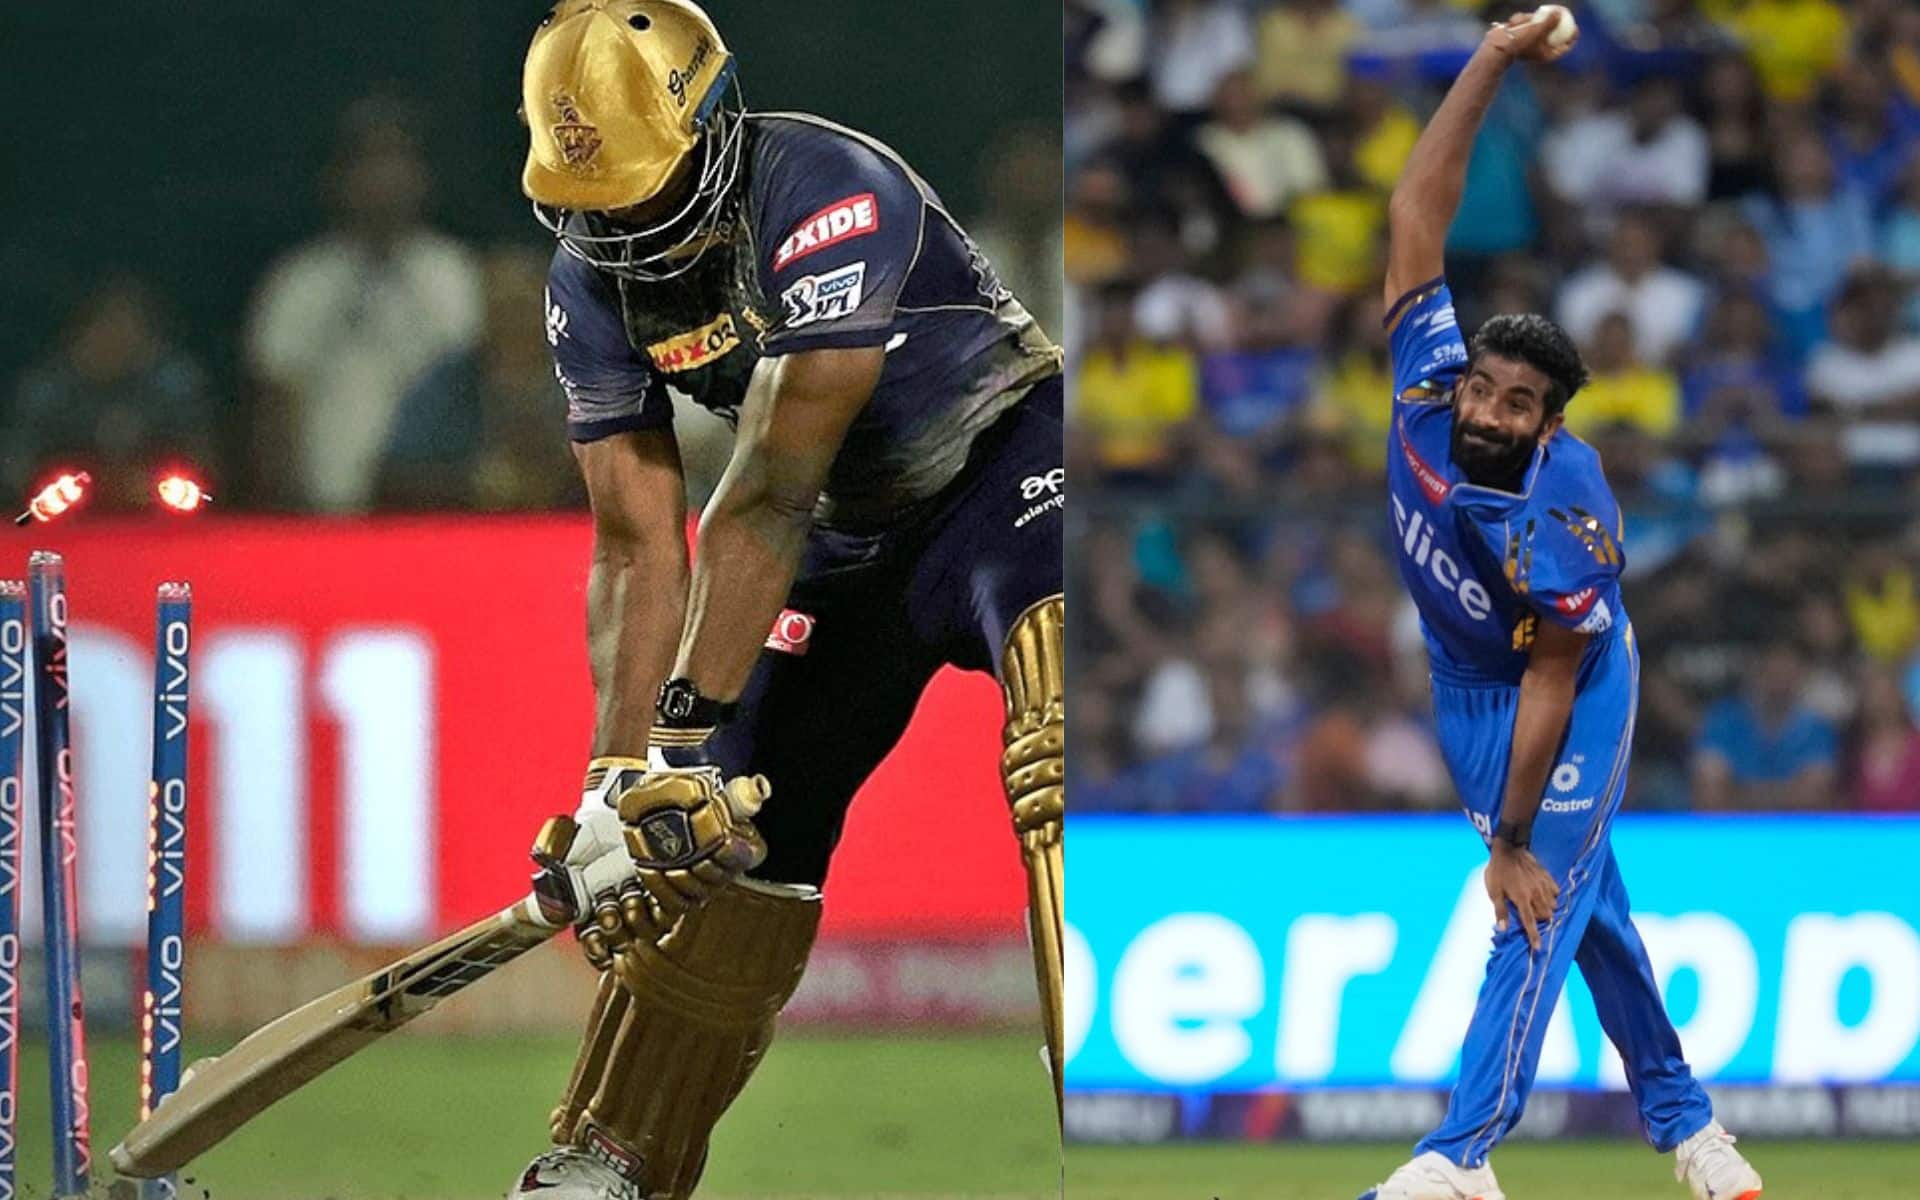 Andrre Russell and Jasprit Bumrah will play a crucial role for their teams [X/AP Photos]